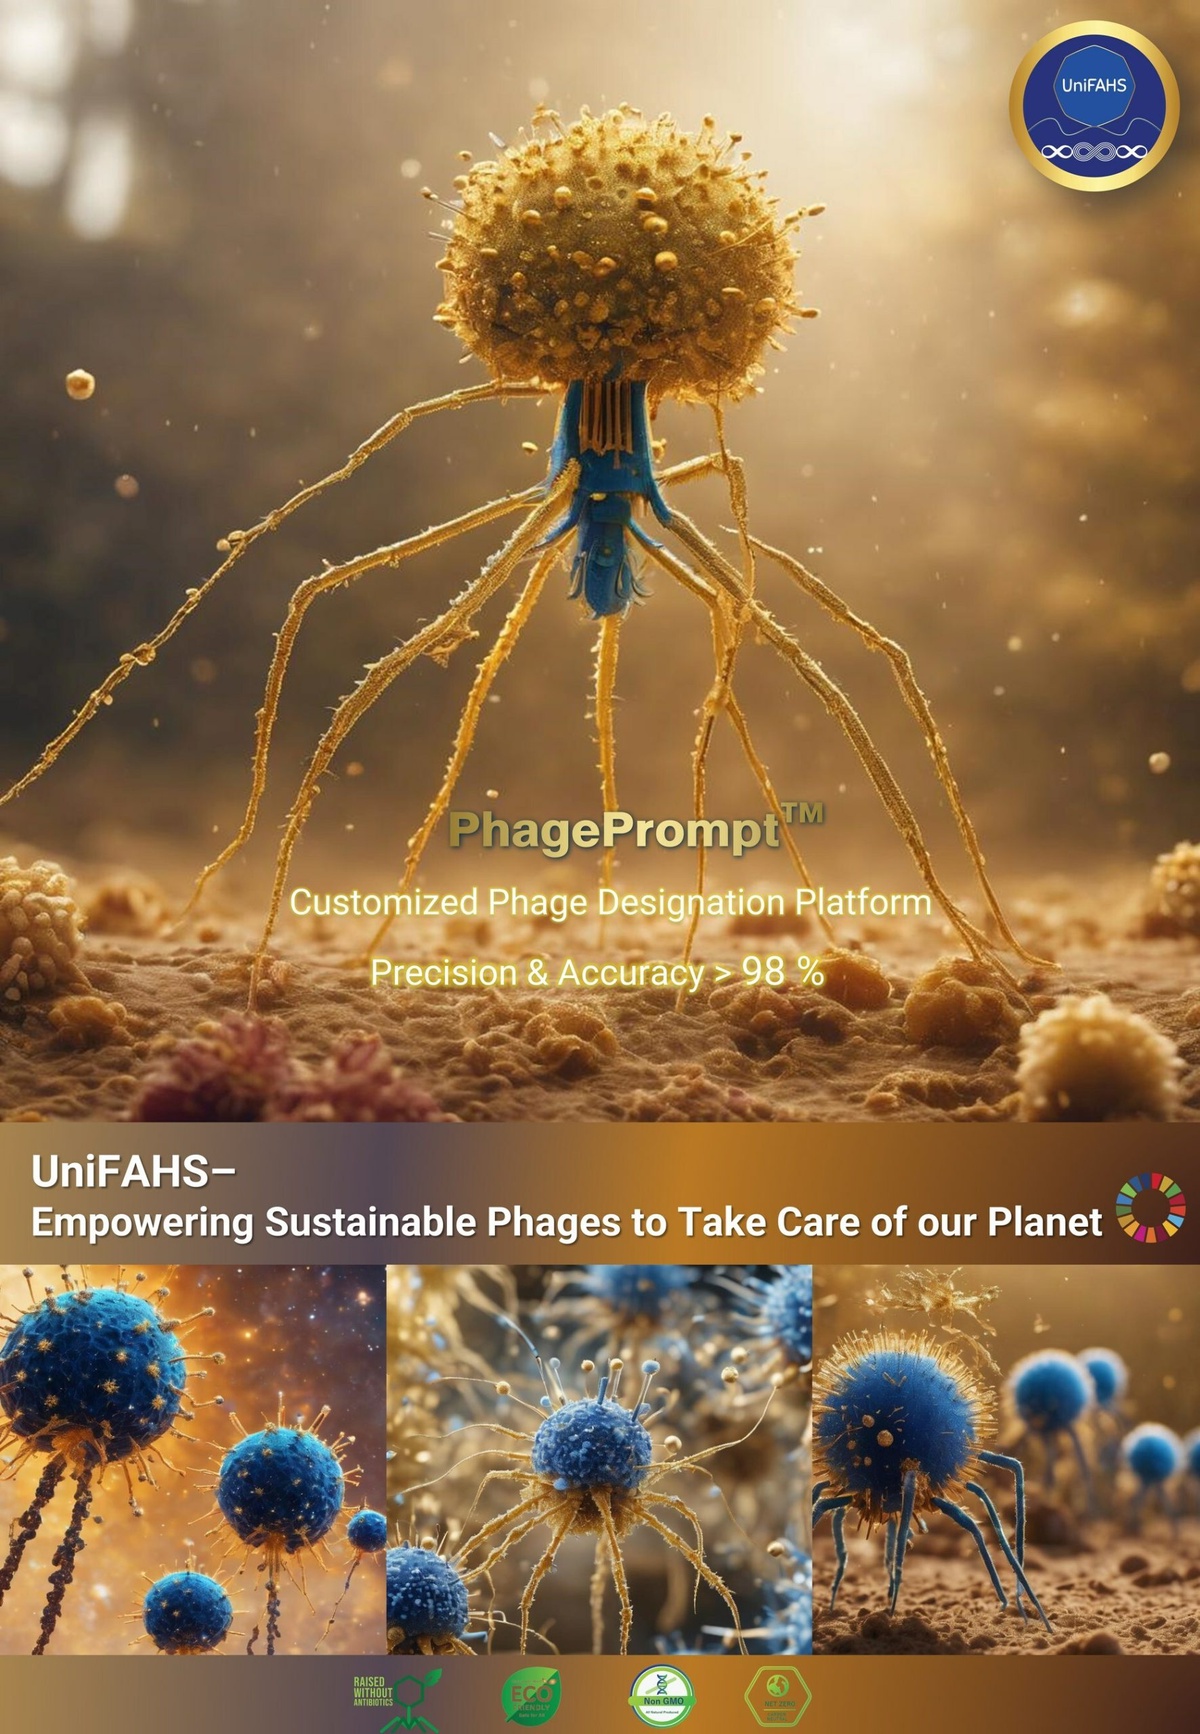 UniFAHS Raises USD 1.4 Million in Seed Funding to Scale Bacteriophage Technology for Sustainable Agriculture